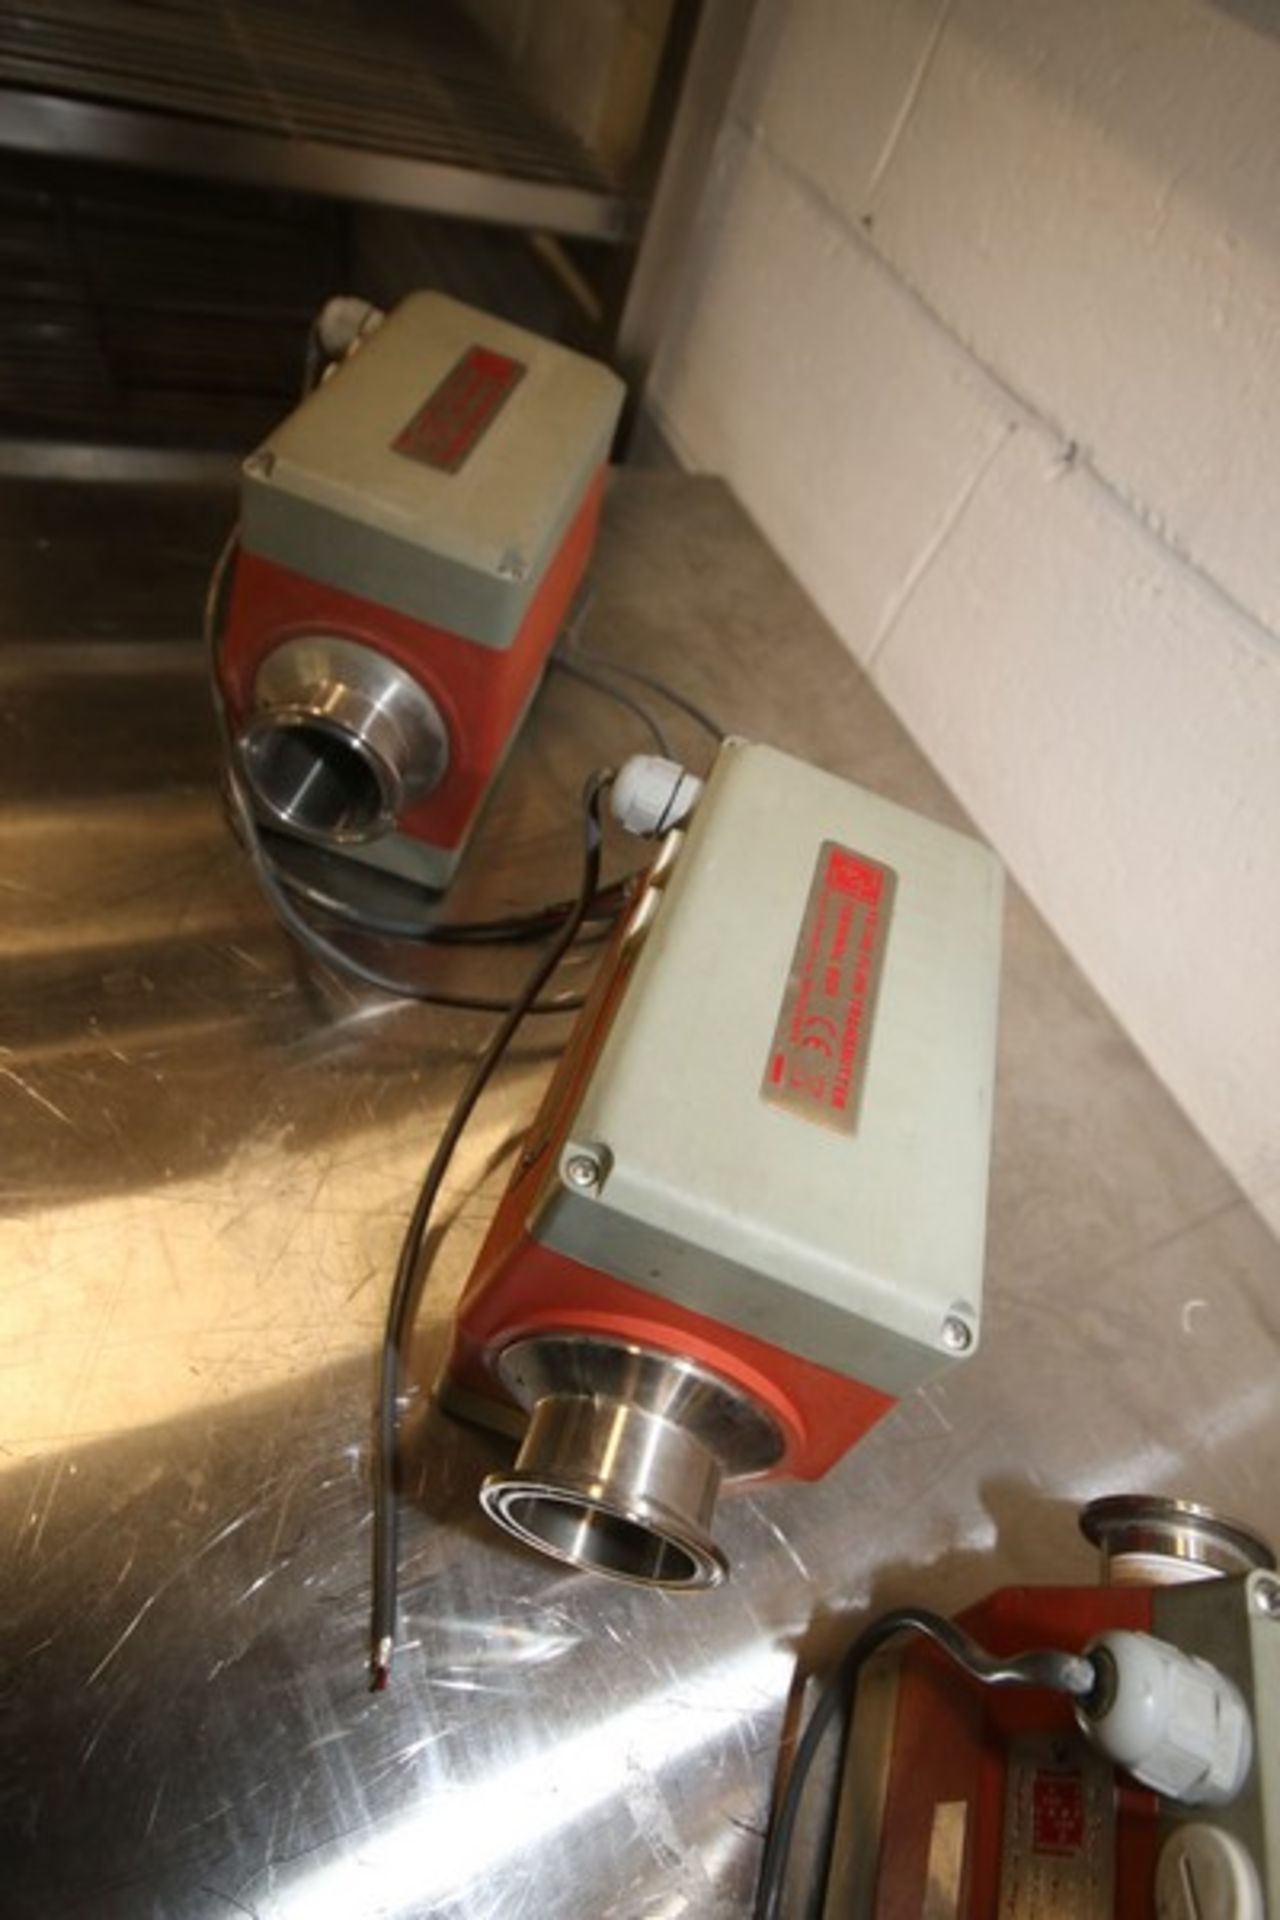 Lot of (3) Process Data PD340 Flow Transmitters / Flow Meters, 1.5" & 2" Clamp Type, Size C38 & C51, - Image 3 of 6